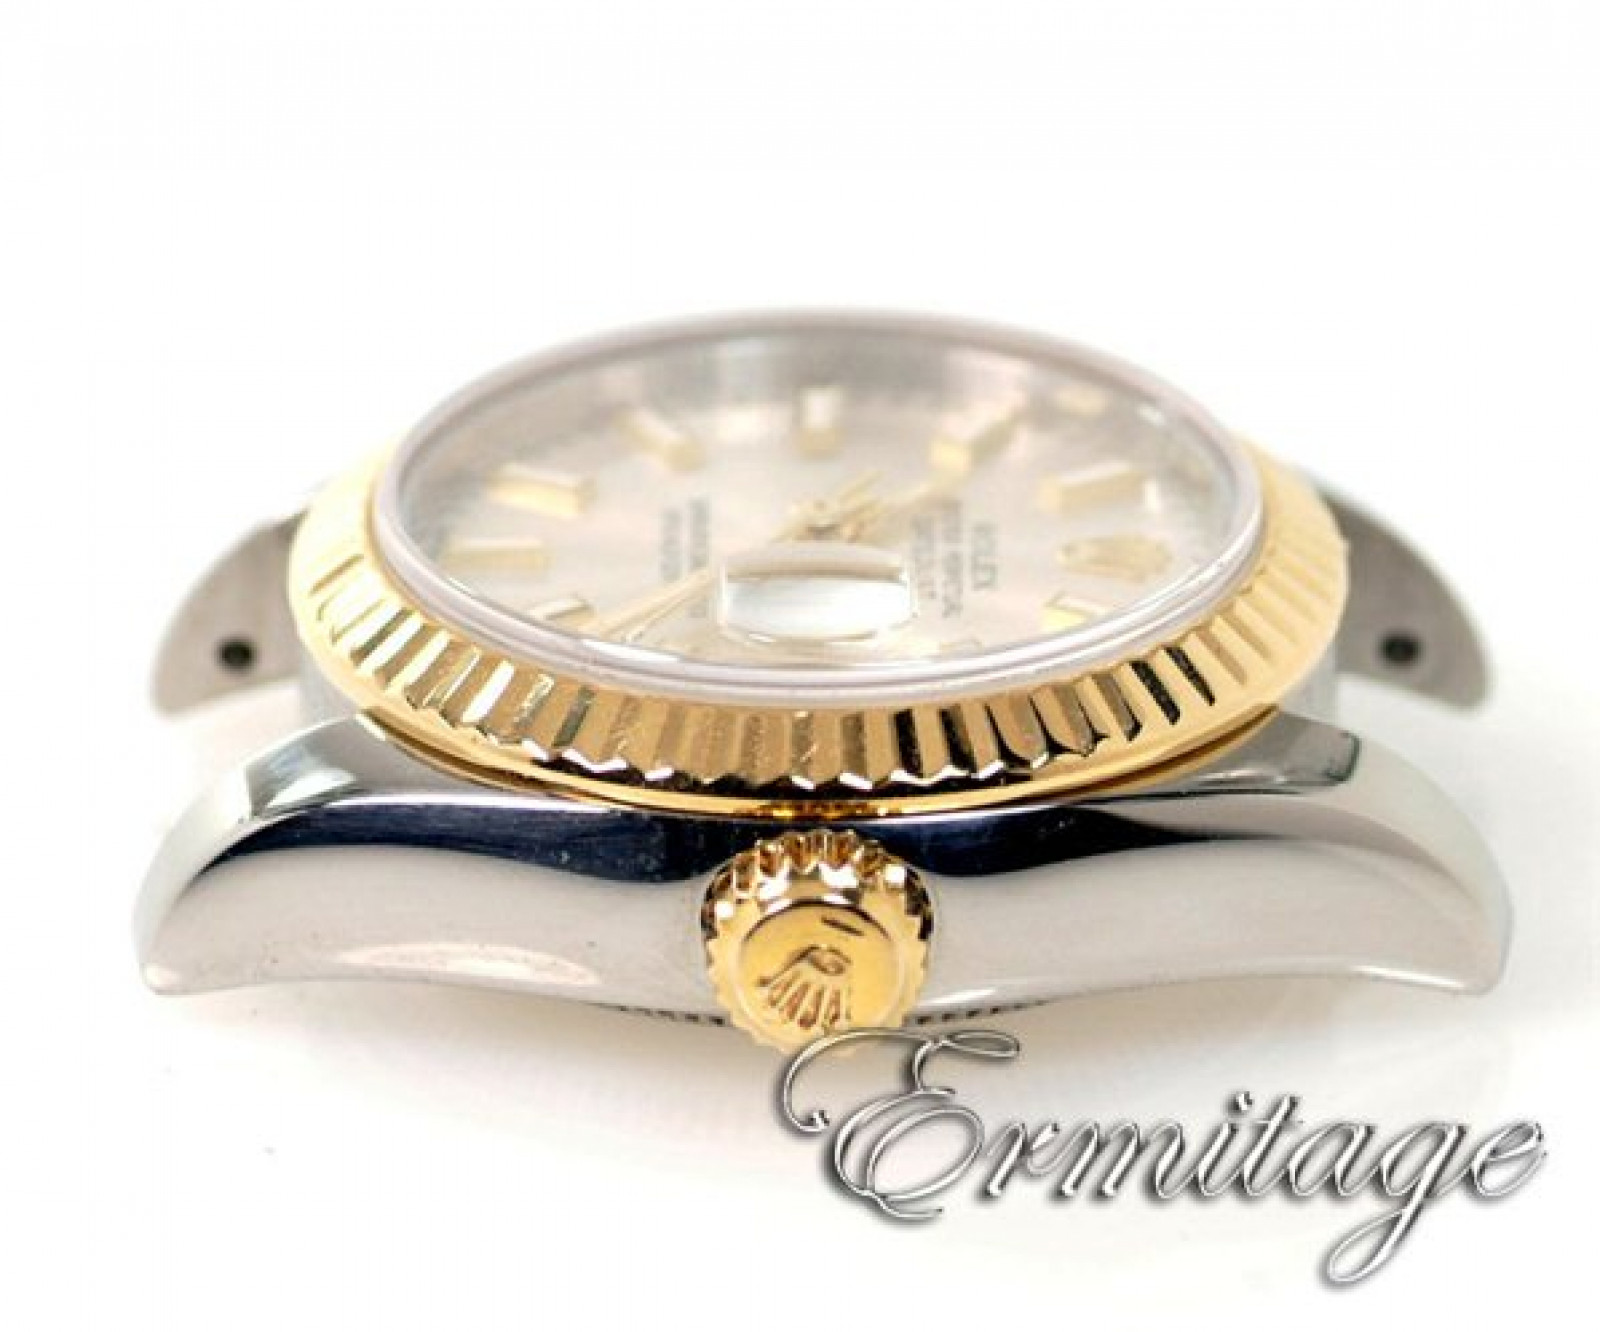 Pre-Owned Gold & Steel Rolex Datejust 179173